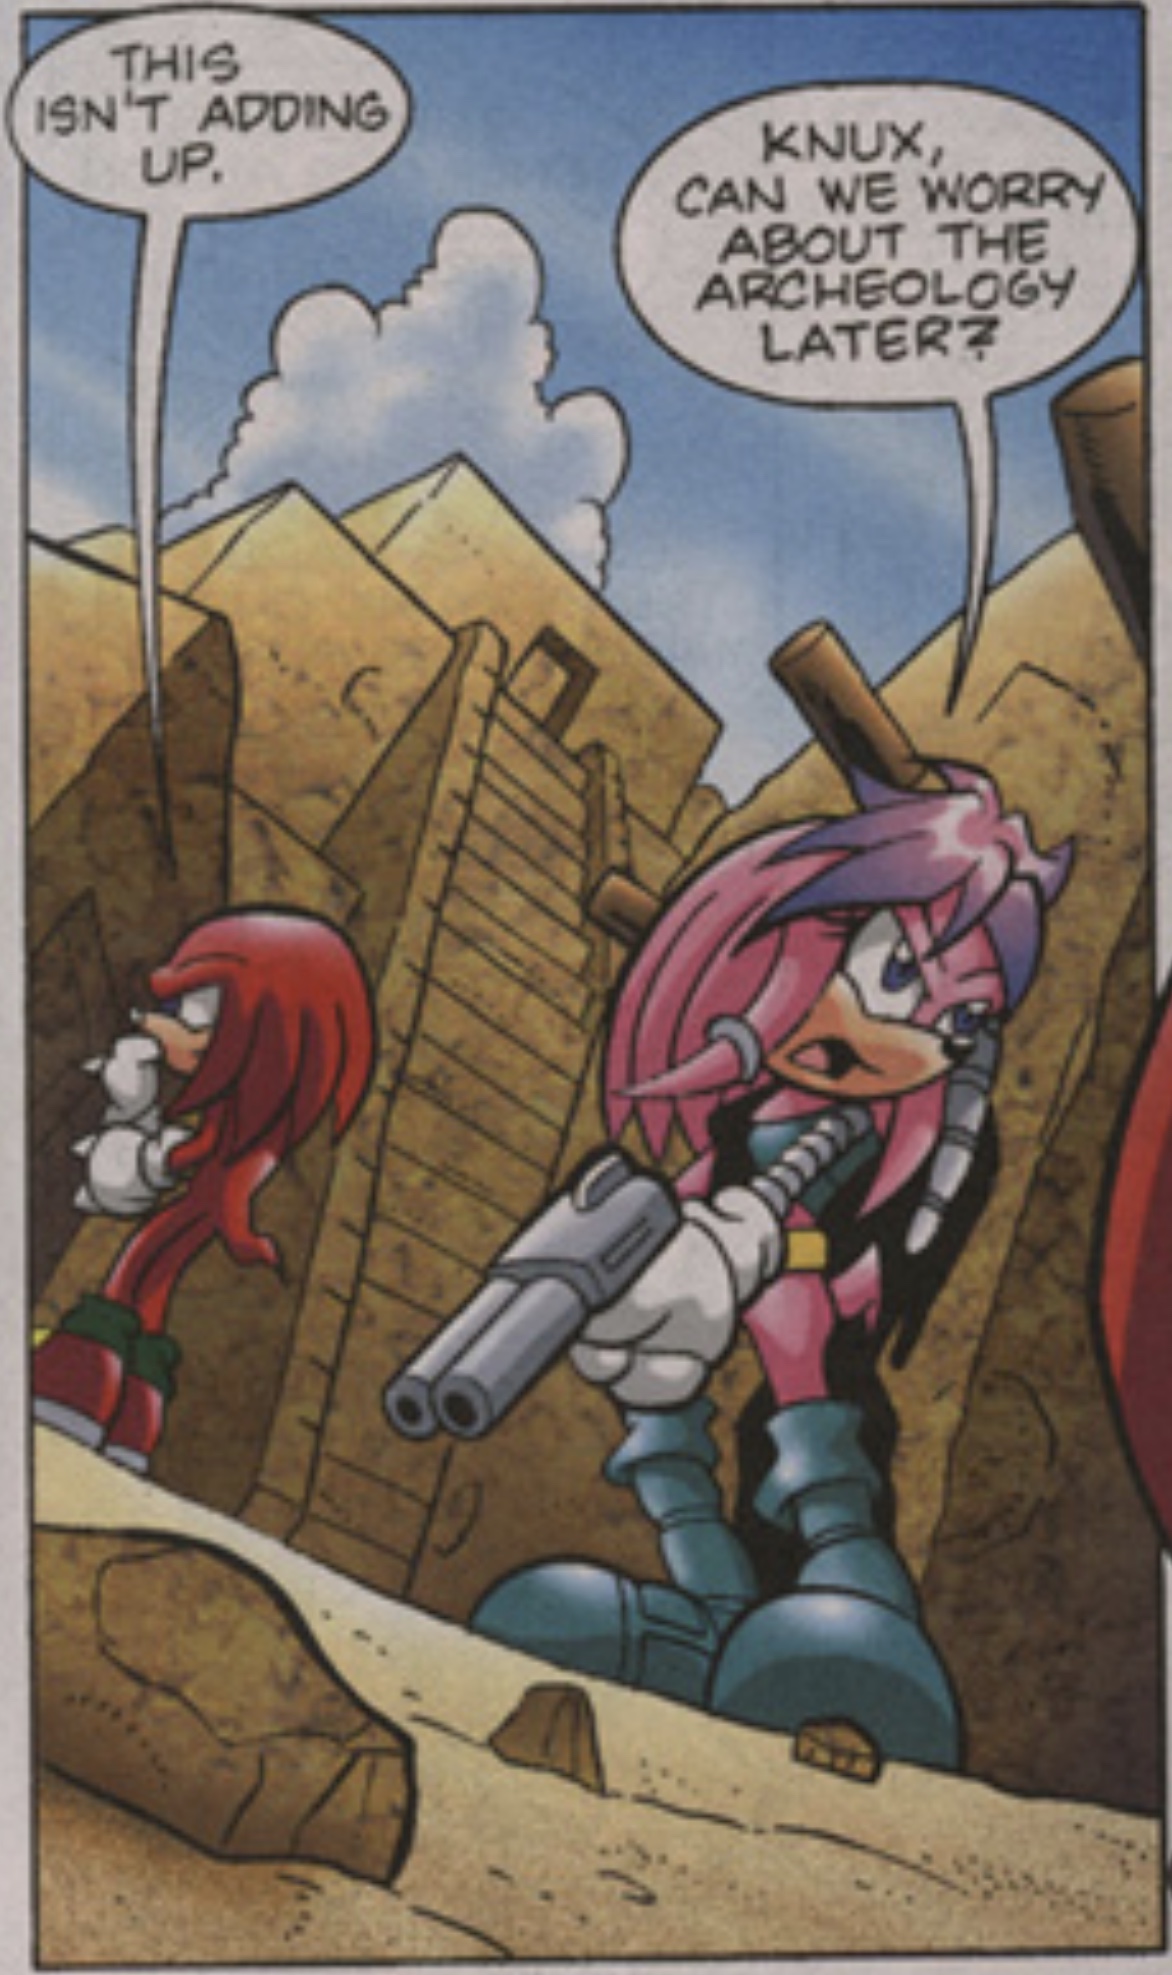 Julie-Su And Knuckles  Sonic heroes, Sonic the hedgehog, Sonic funny